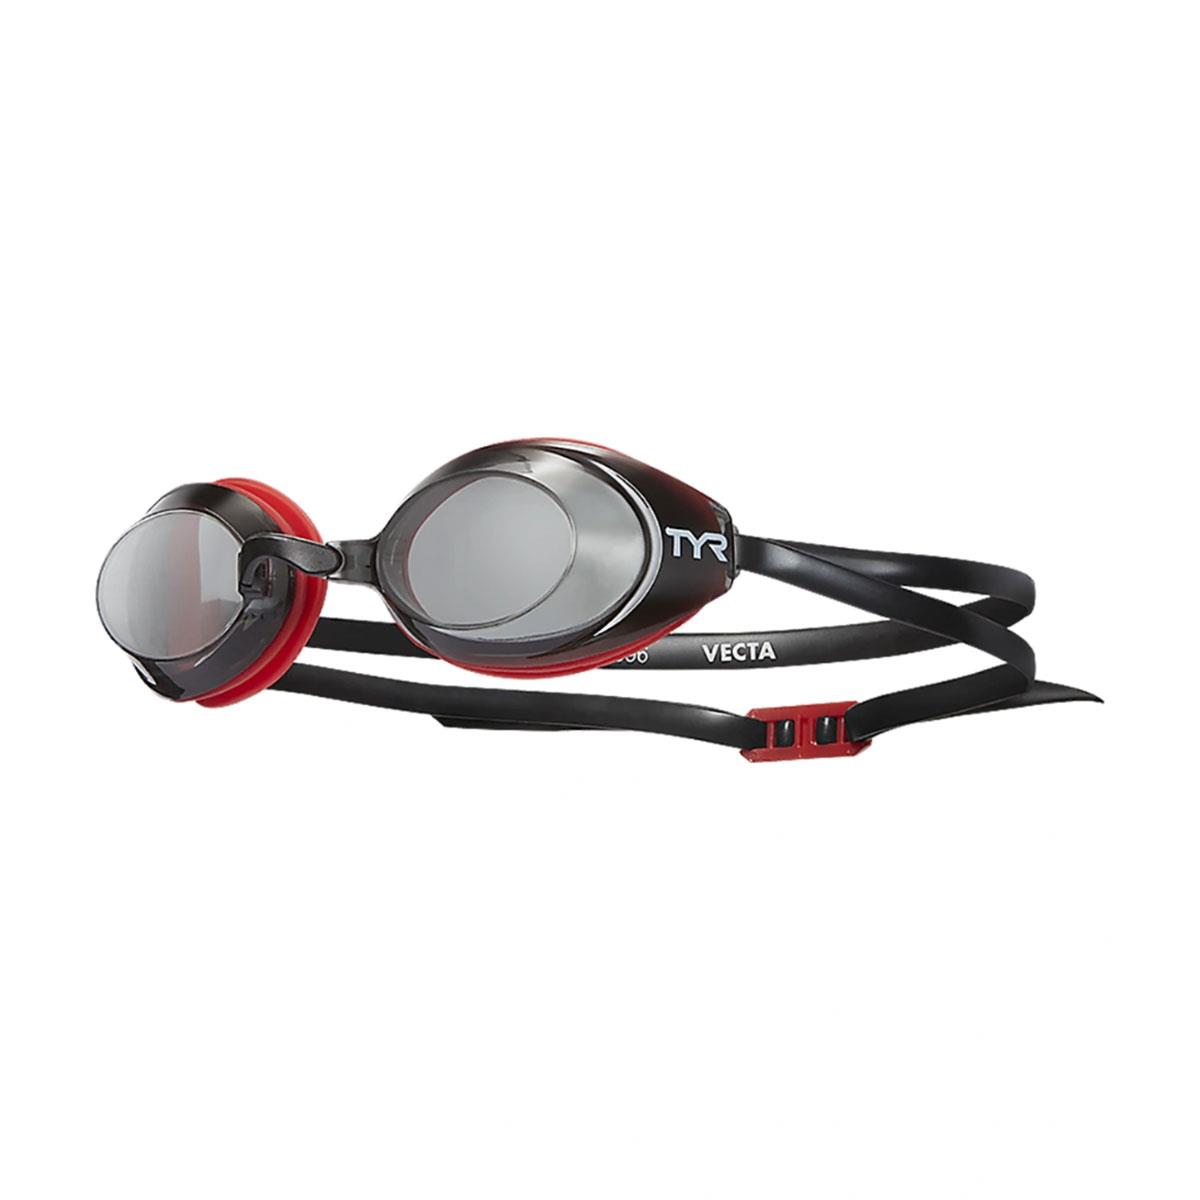 TYR Vecta Goggles - Smoke/ Red/ Black